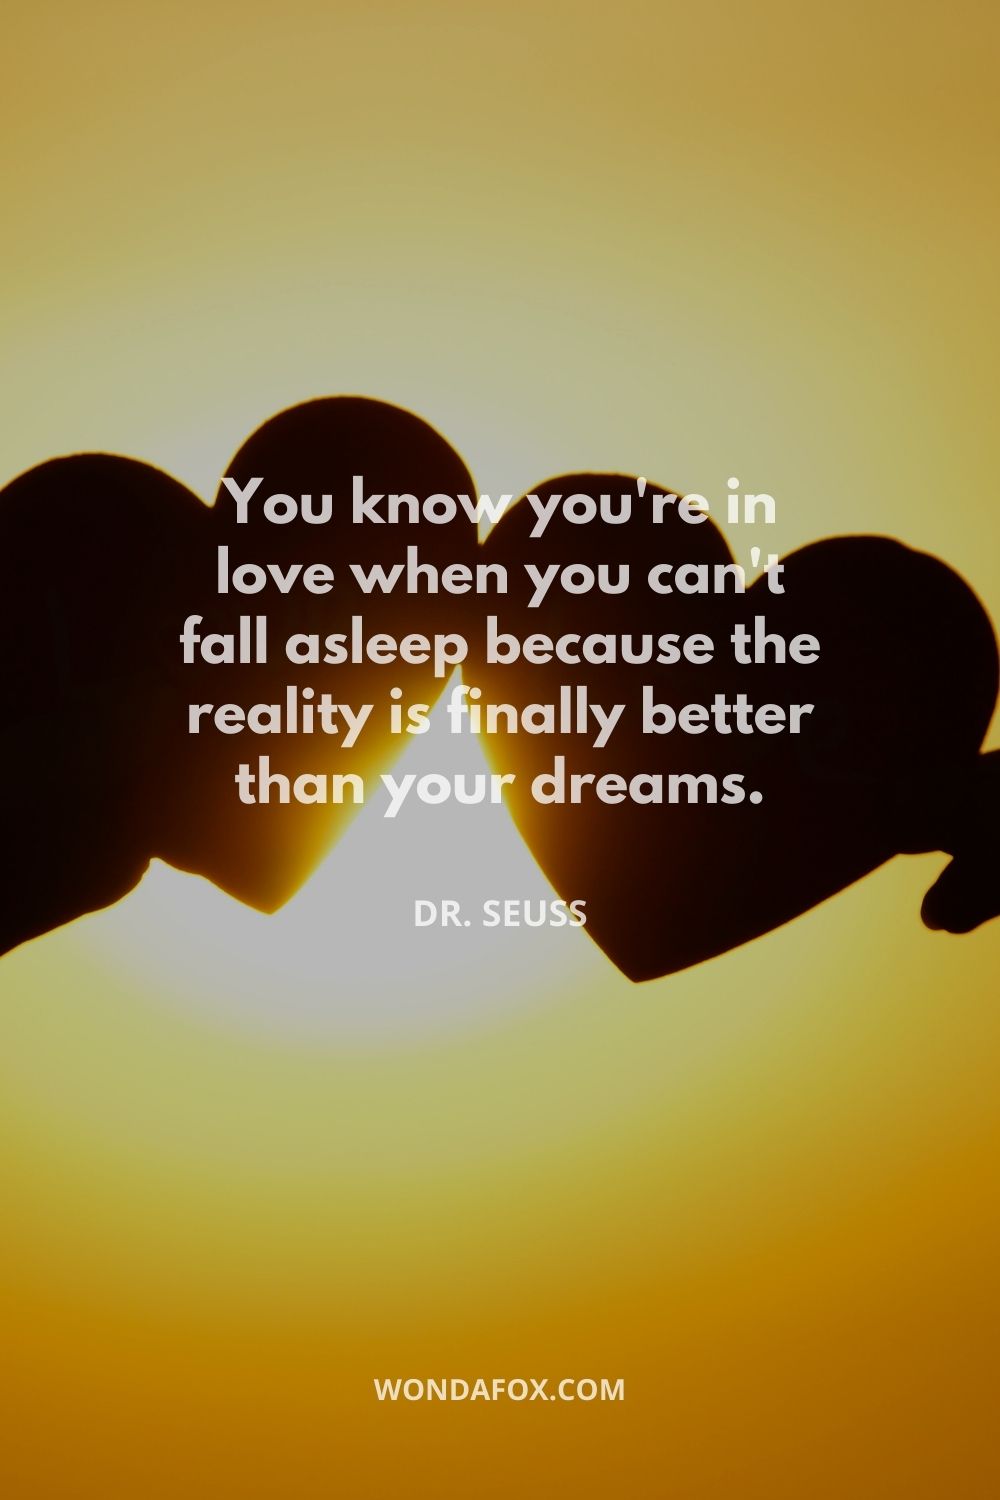 You know you're in love when you can't fall asleep because the reality is finally better than your dreams.